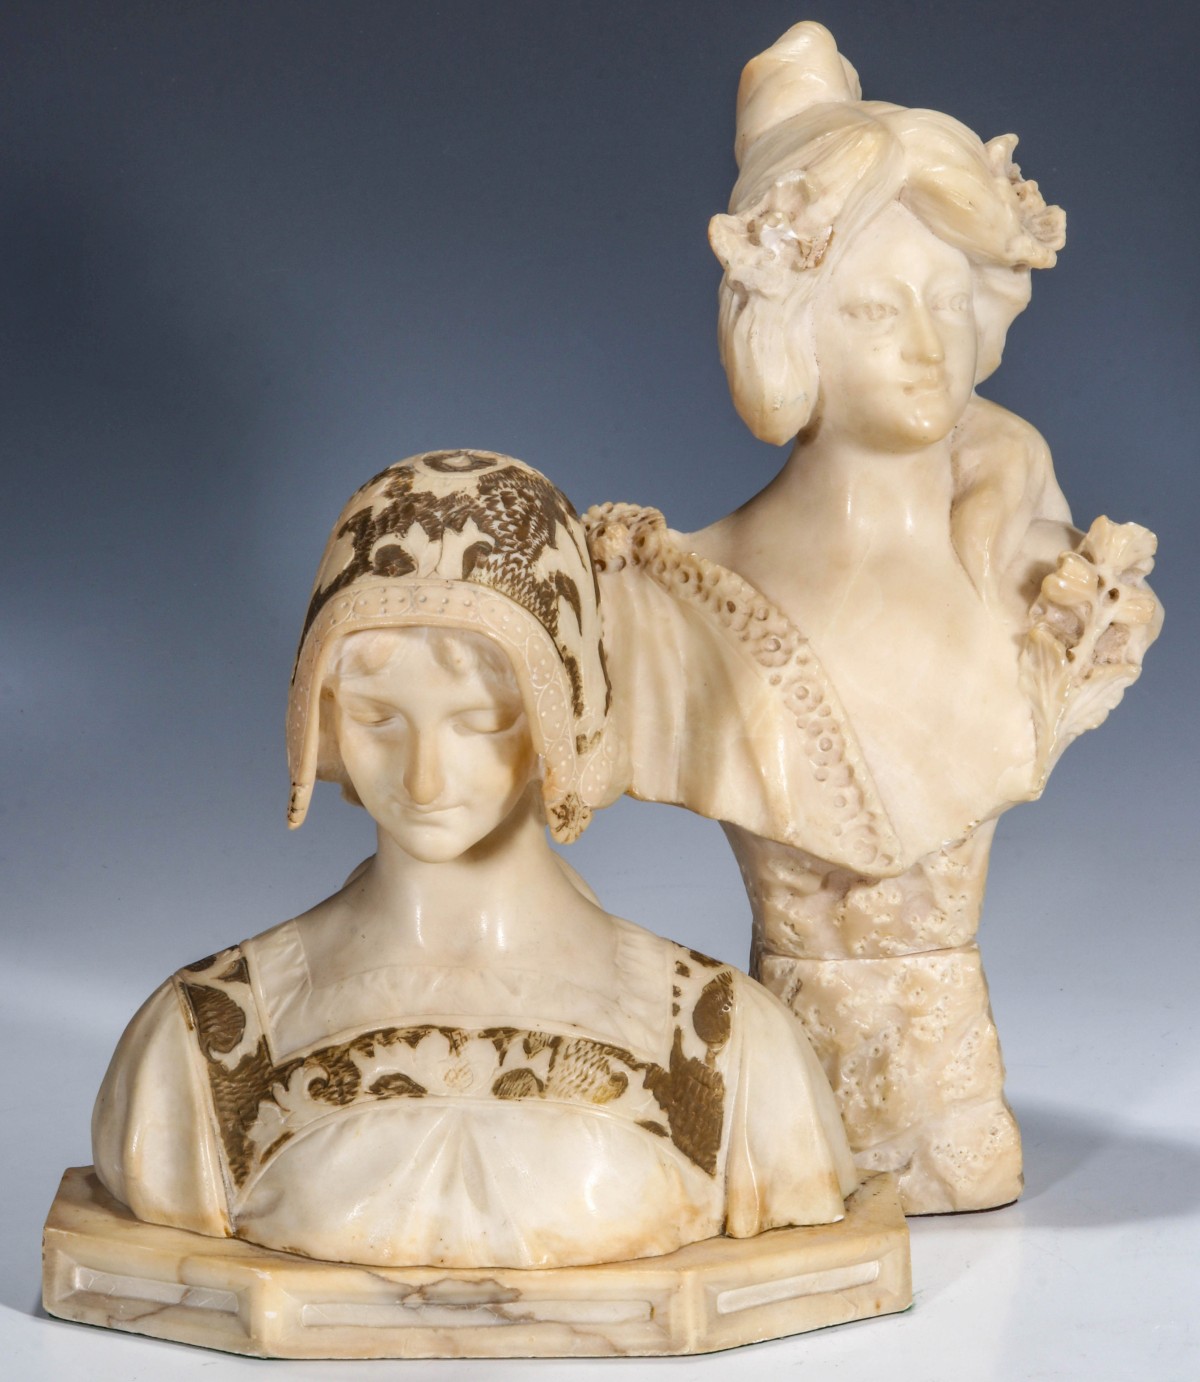 TWO EARLY 20TH C. ITALIAN SCHOOL MARBLE BUST FIGURES